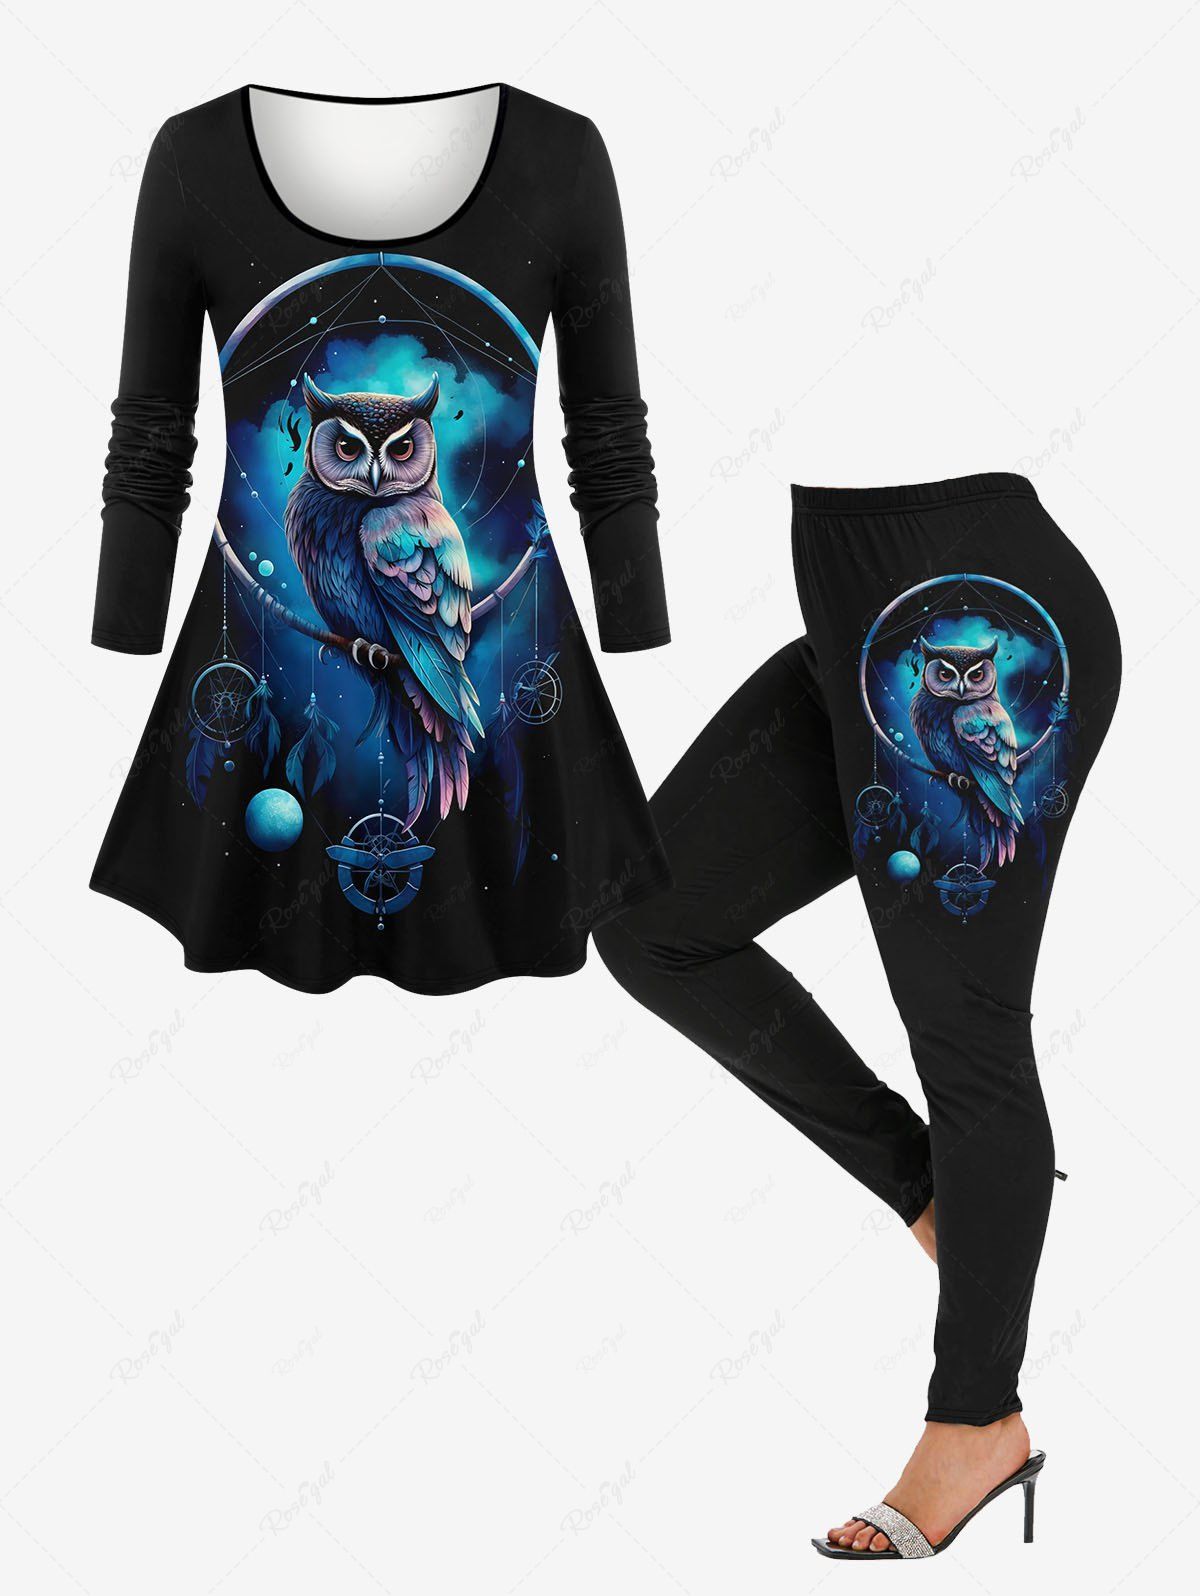 Chic Galaxy Owl Dream Catcher Feather Tassel Printed Long Sleeve T-shirt and Leggings Plus Size Matching Set  